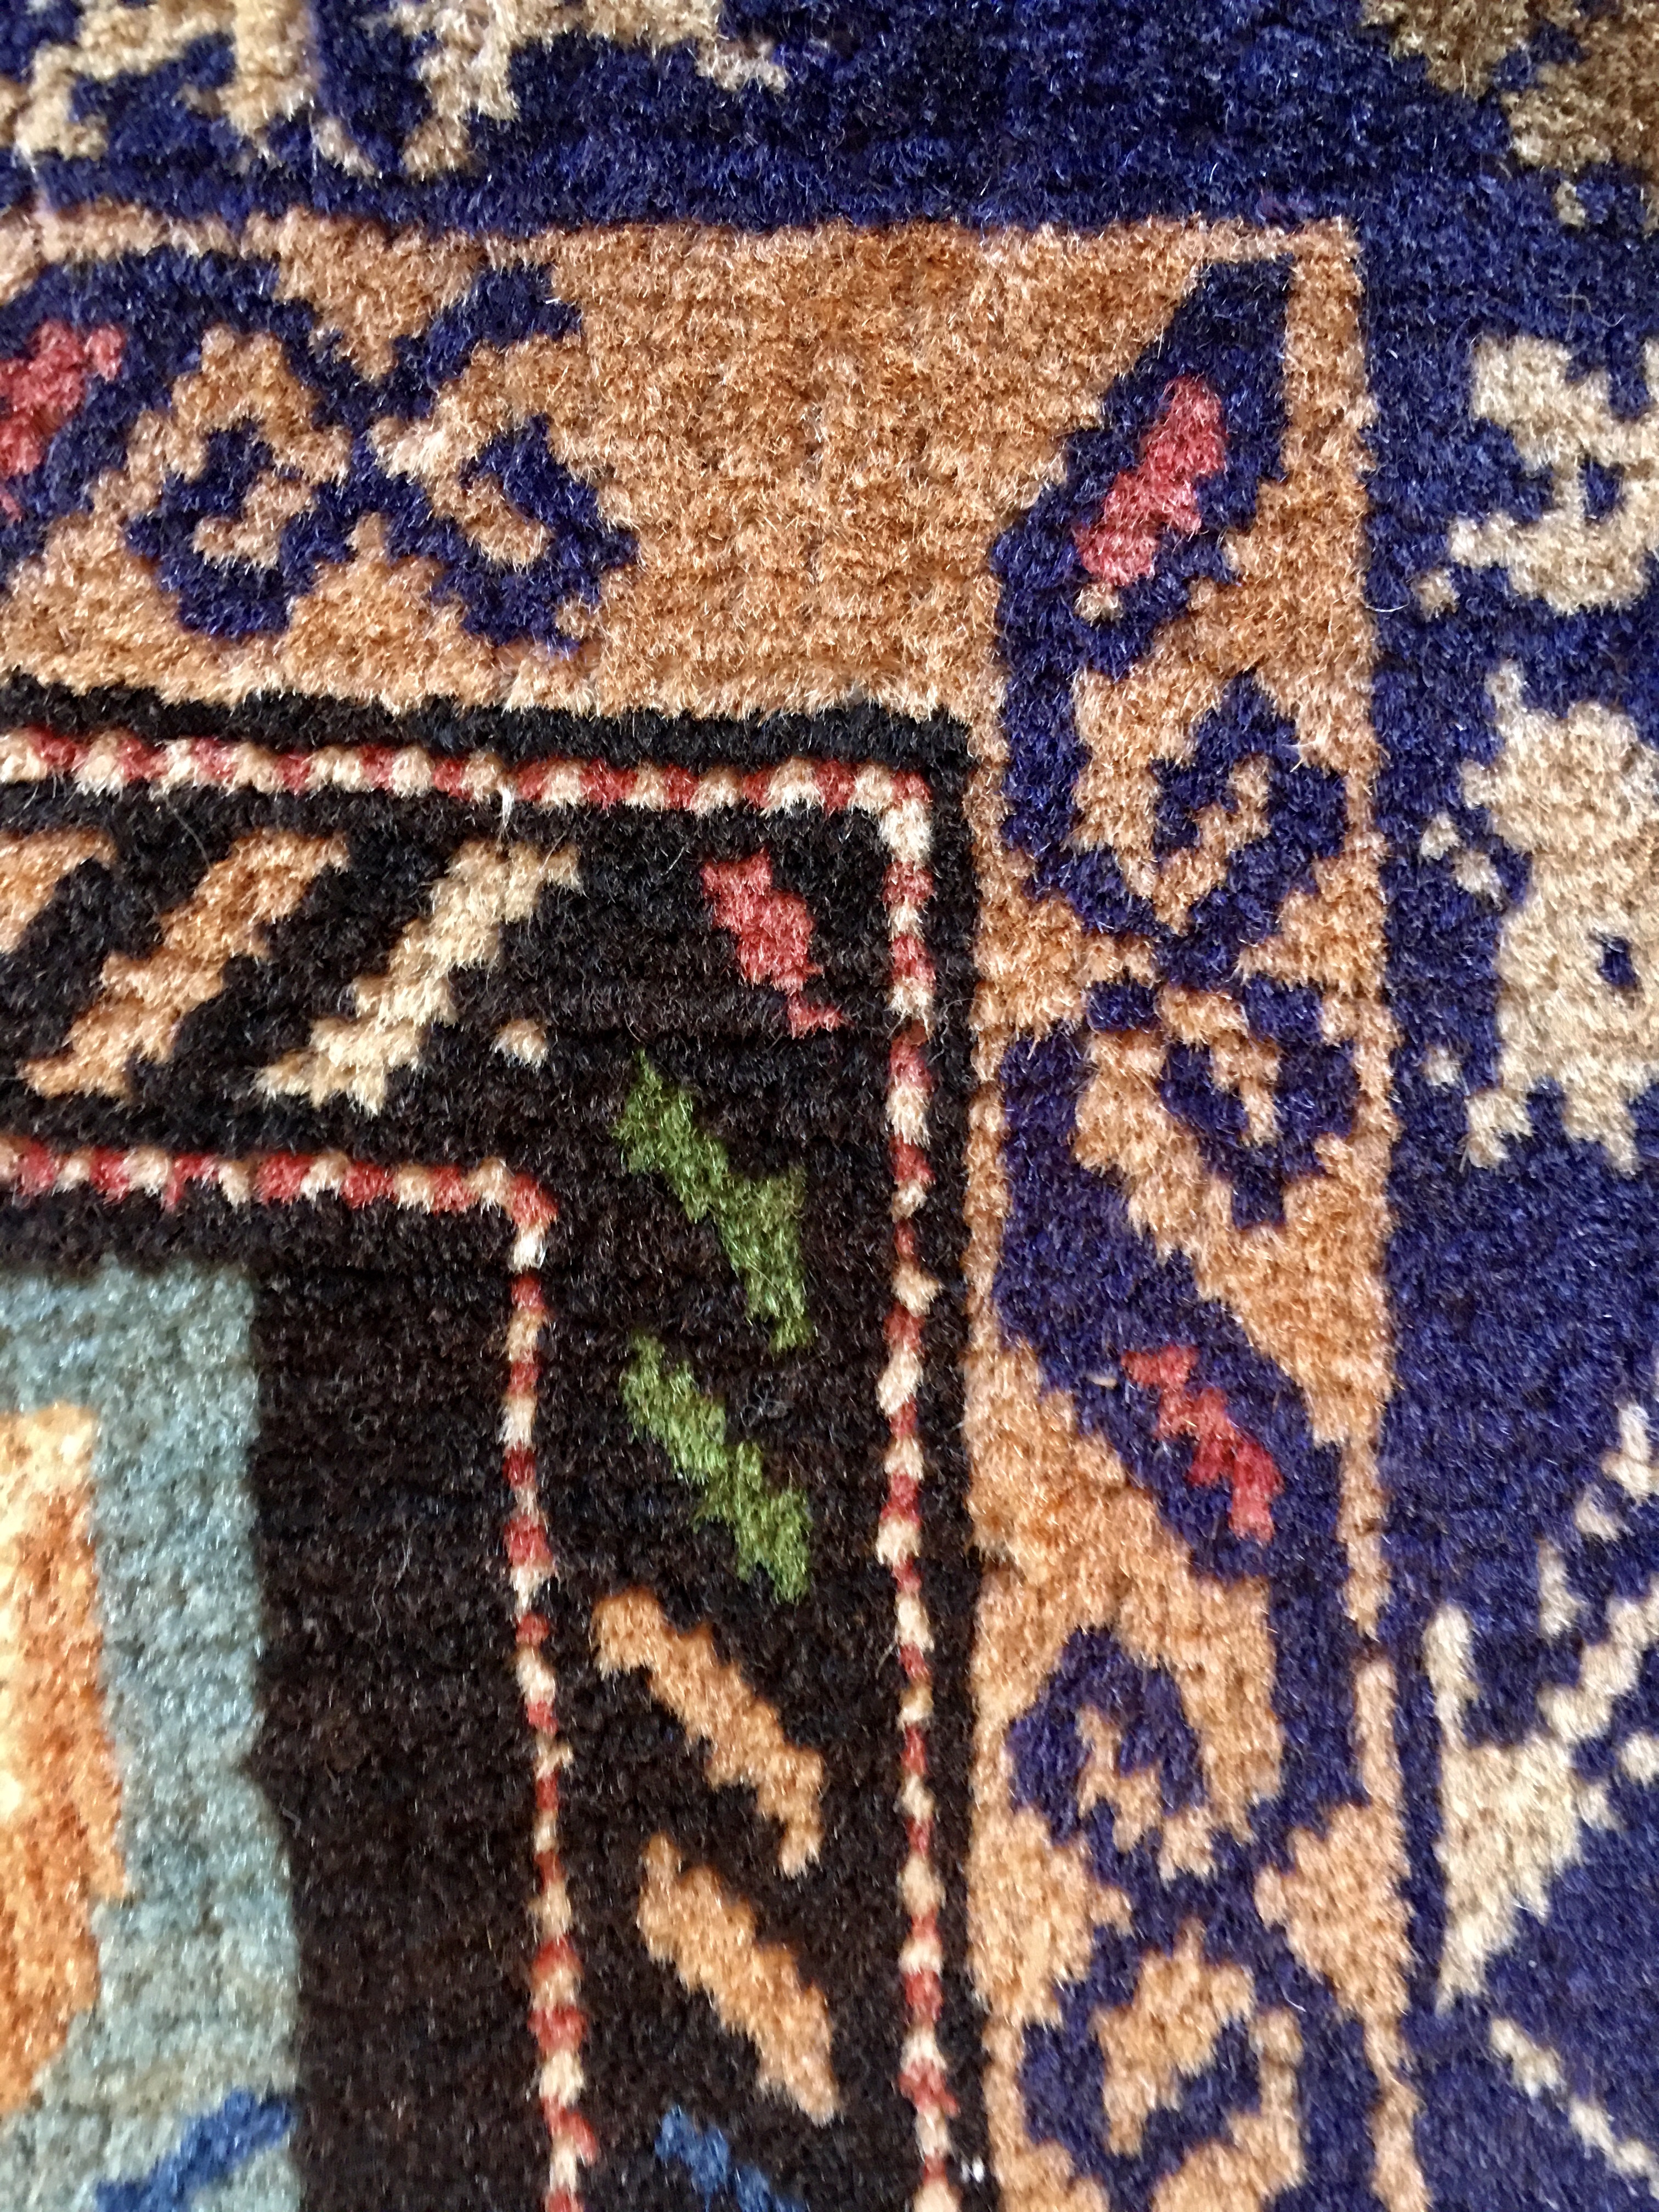 A detailed photo of the rug's edge, highlighting layers of different stripes.